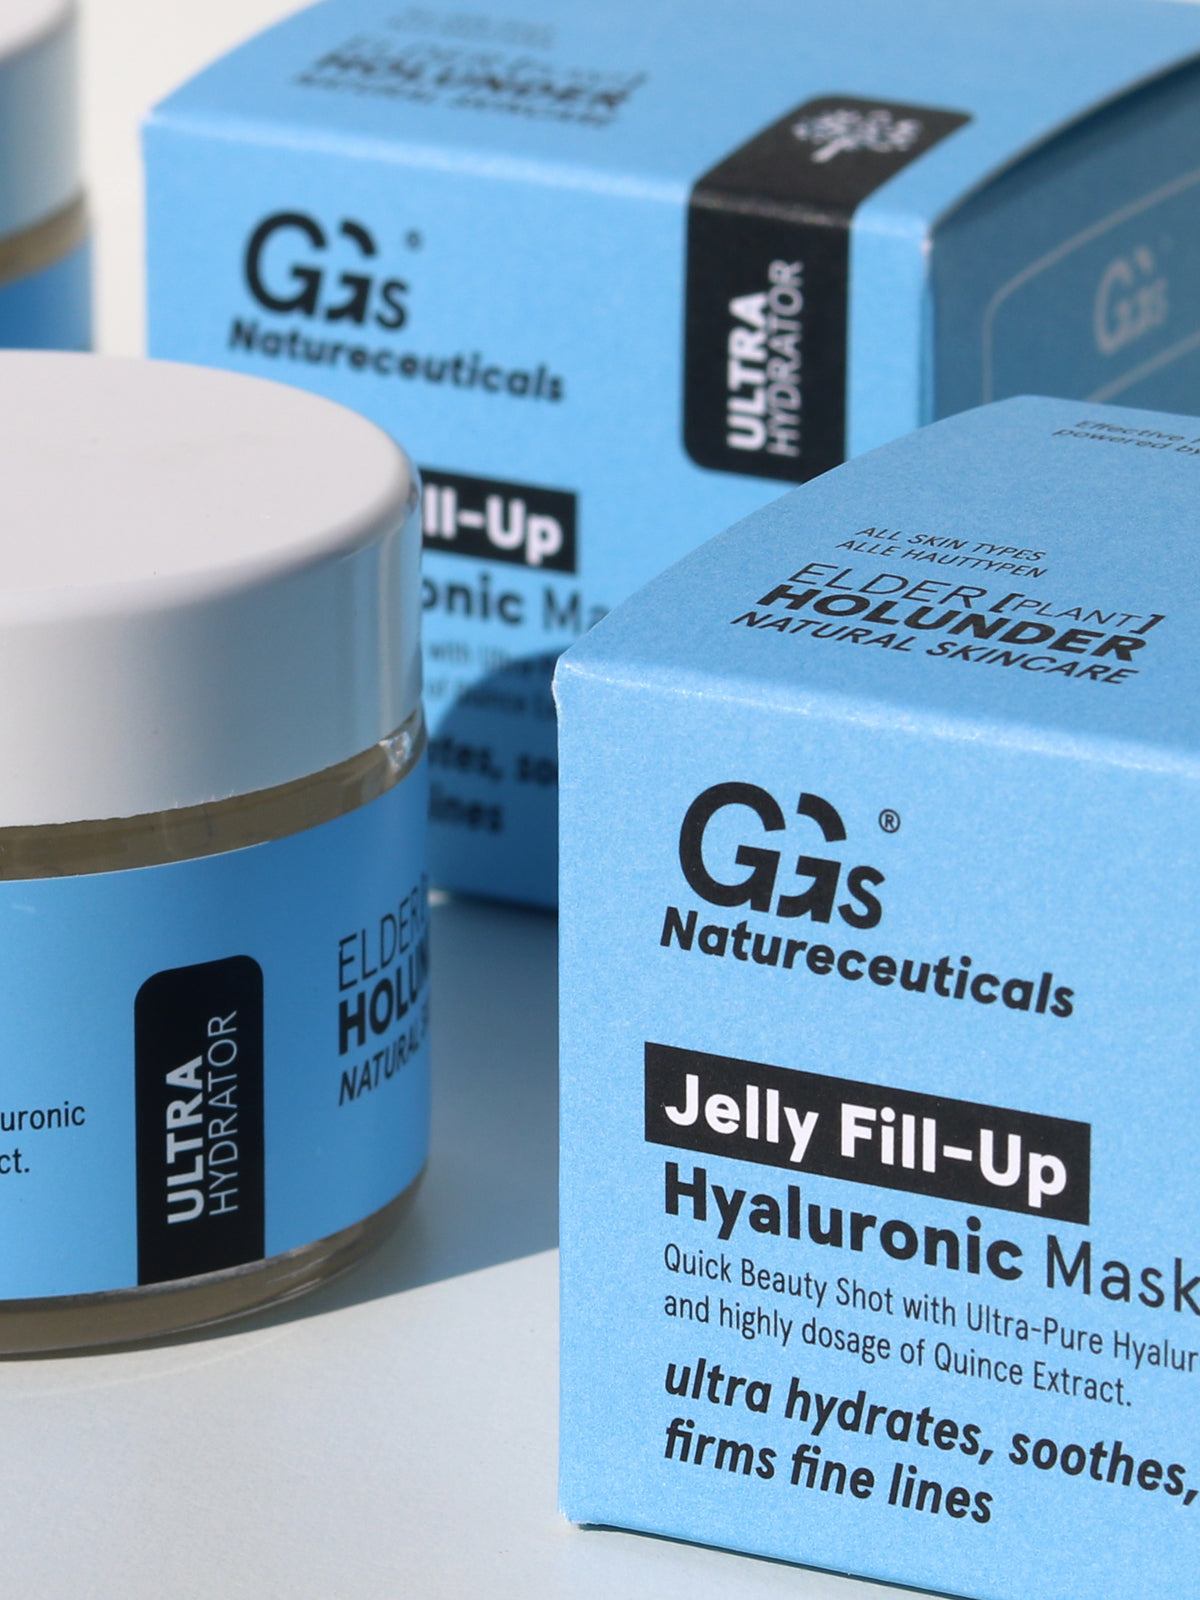 Jelly Fill-Up Hyaluronic Mask | GGs Natureceuticals